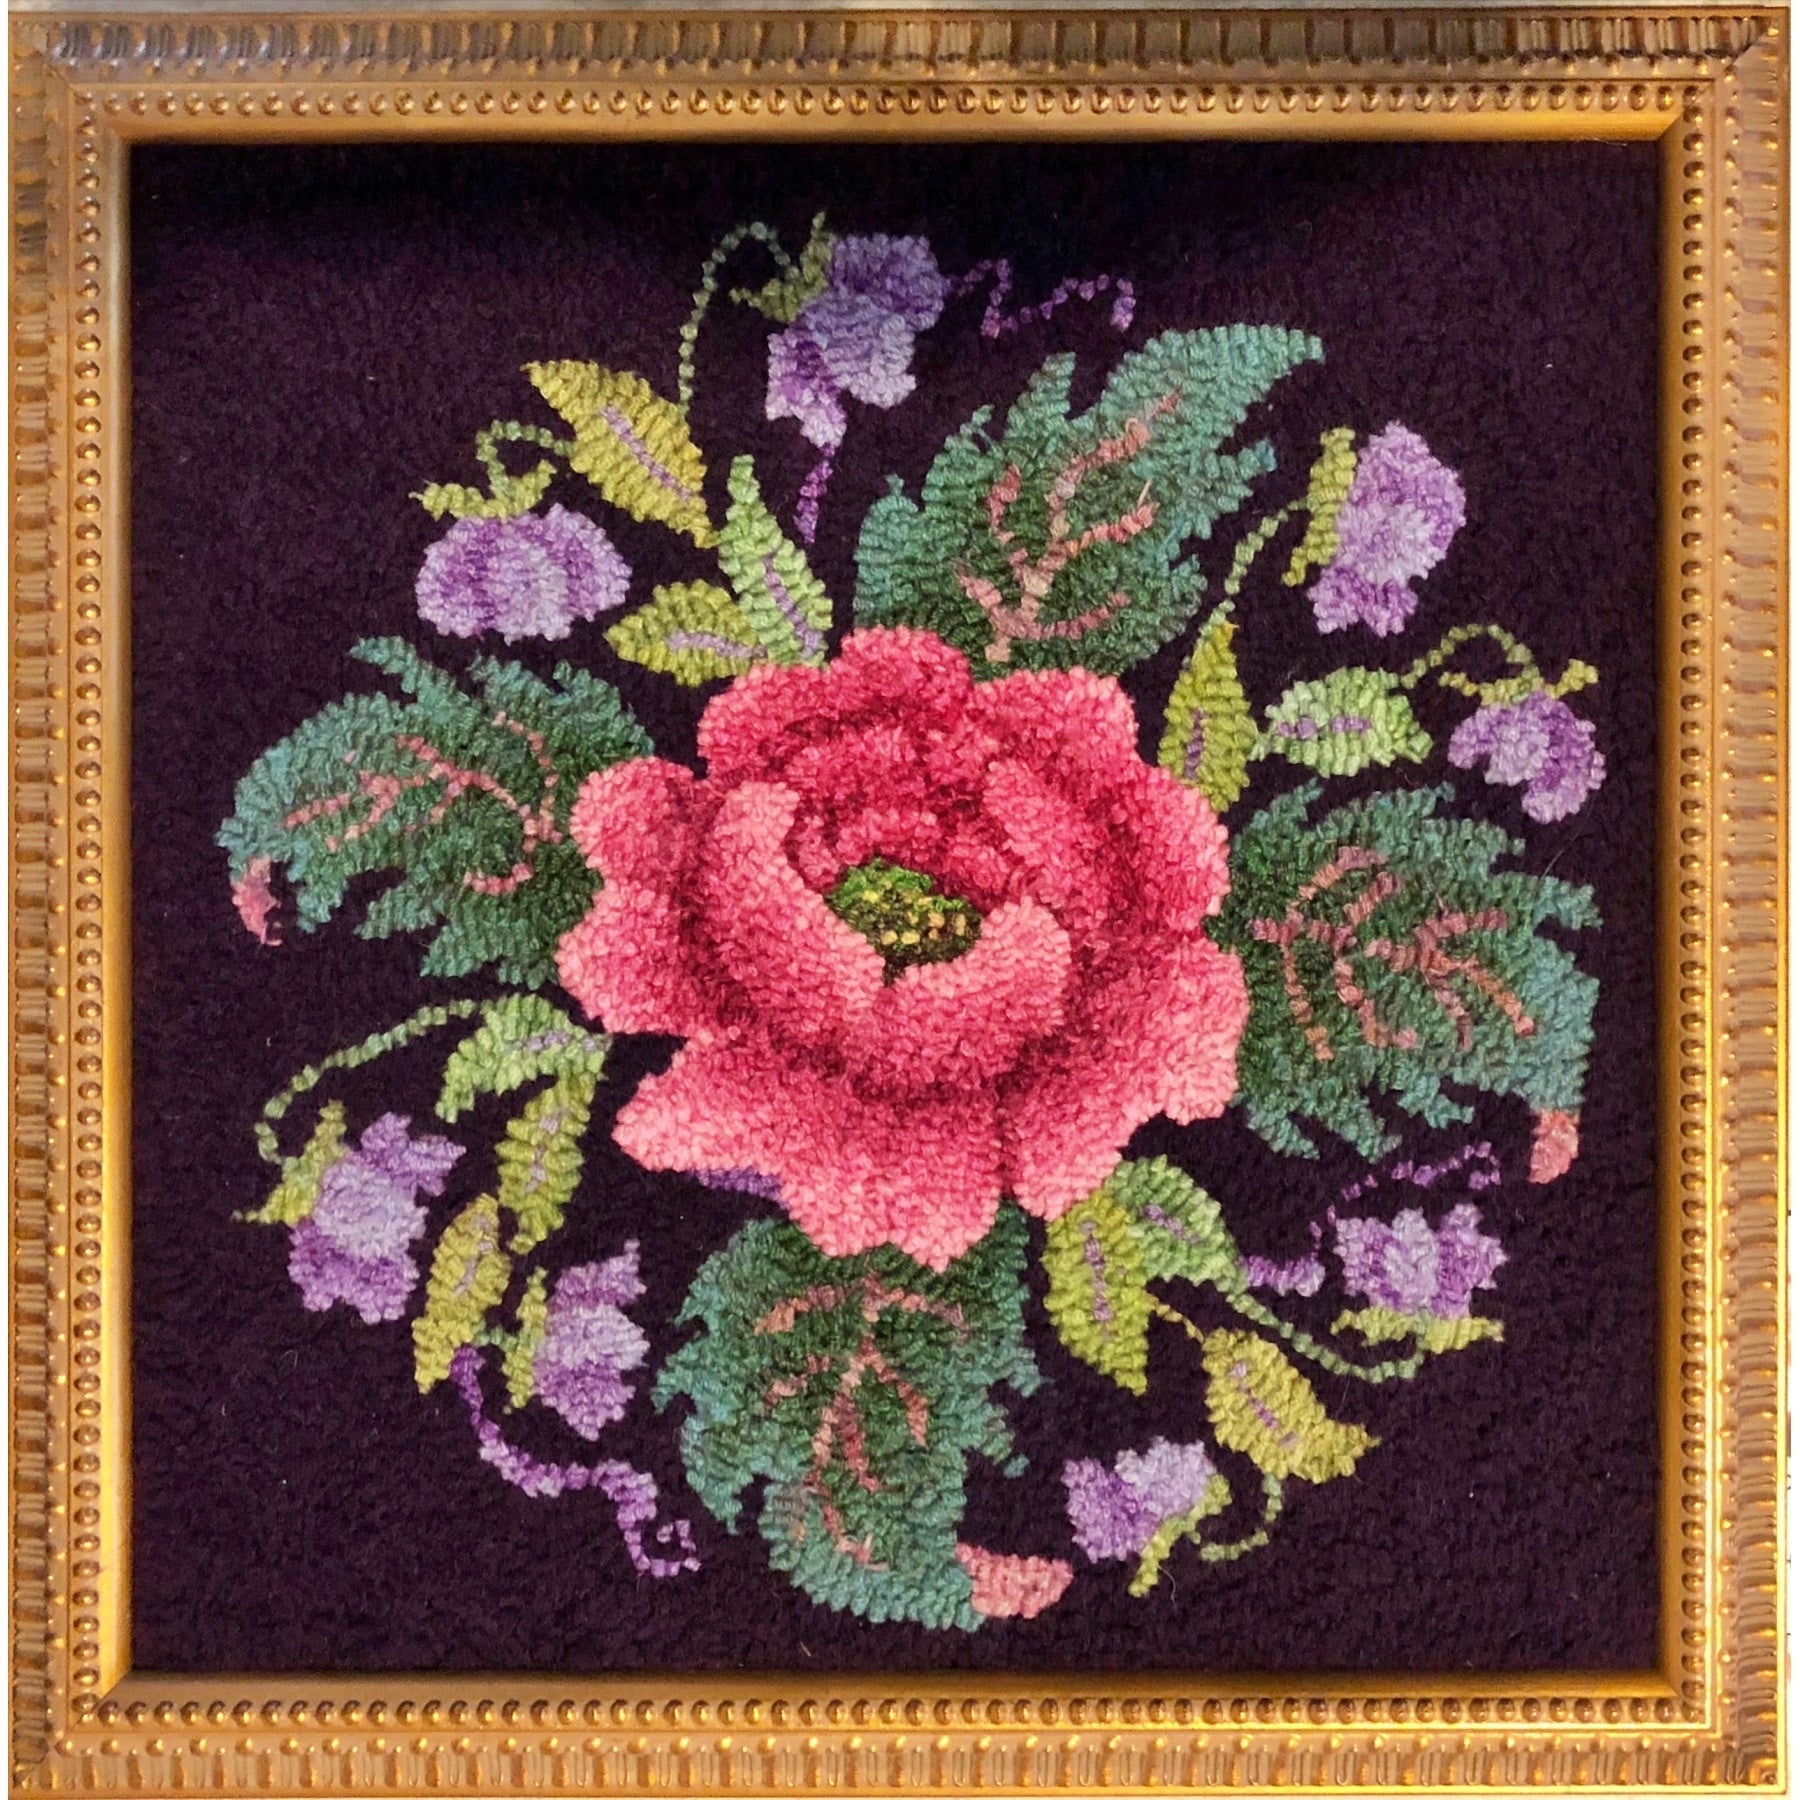 Ruthie Rose, rug hooked by Vivily Powers